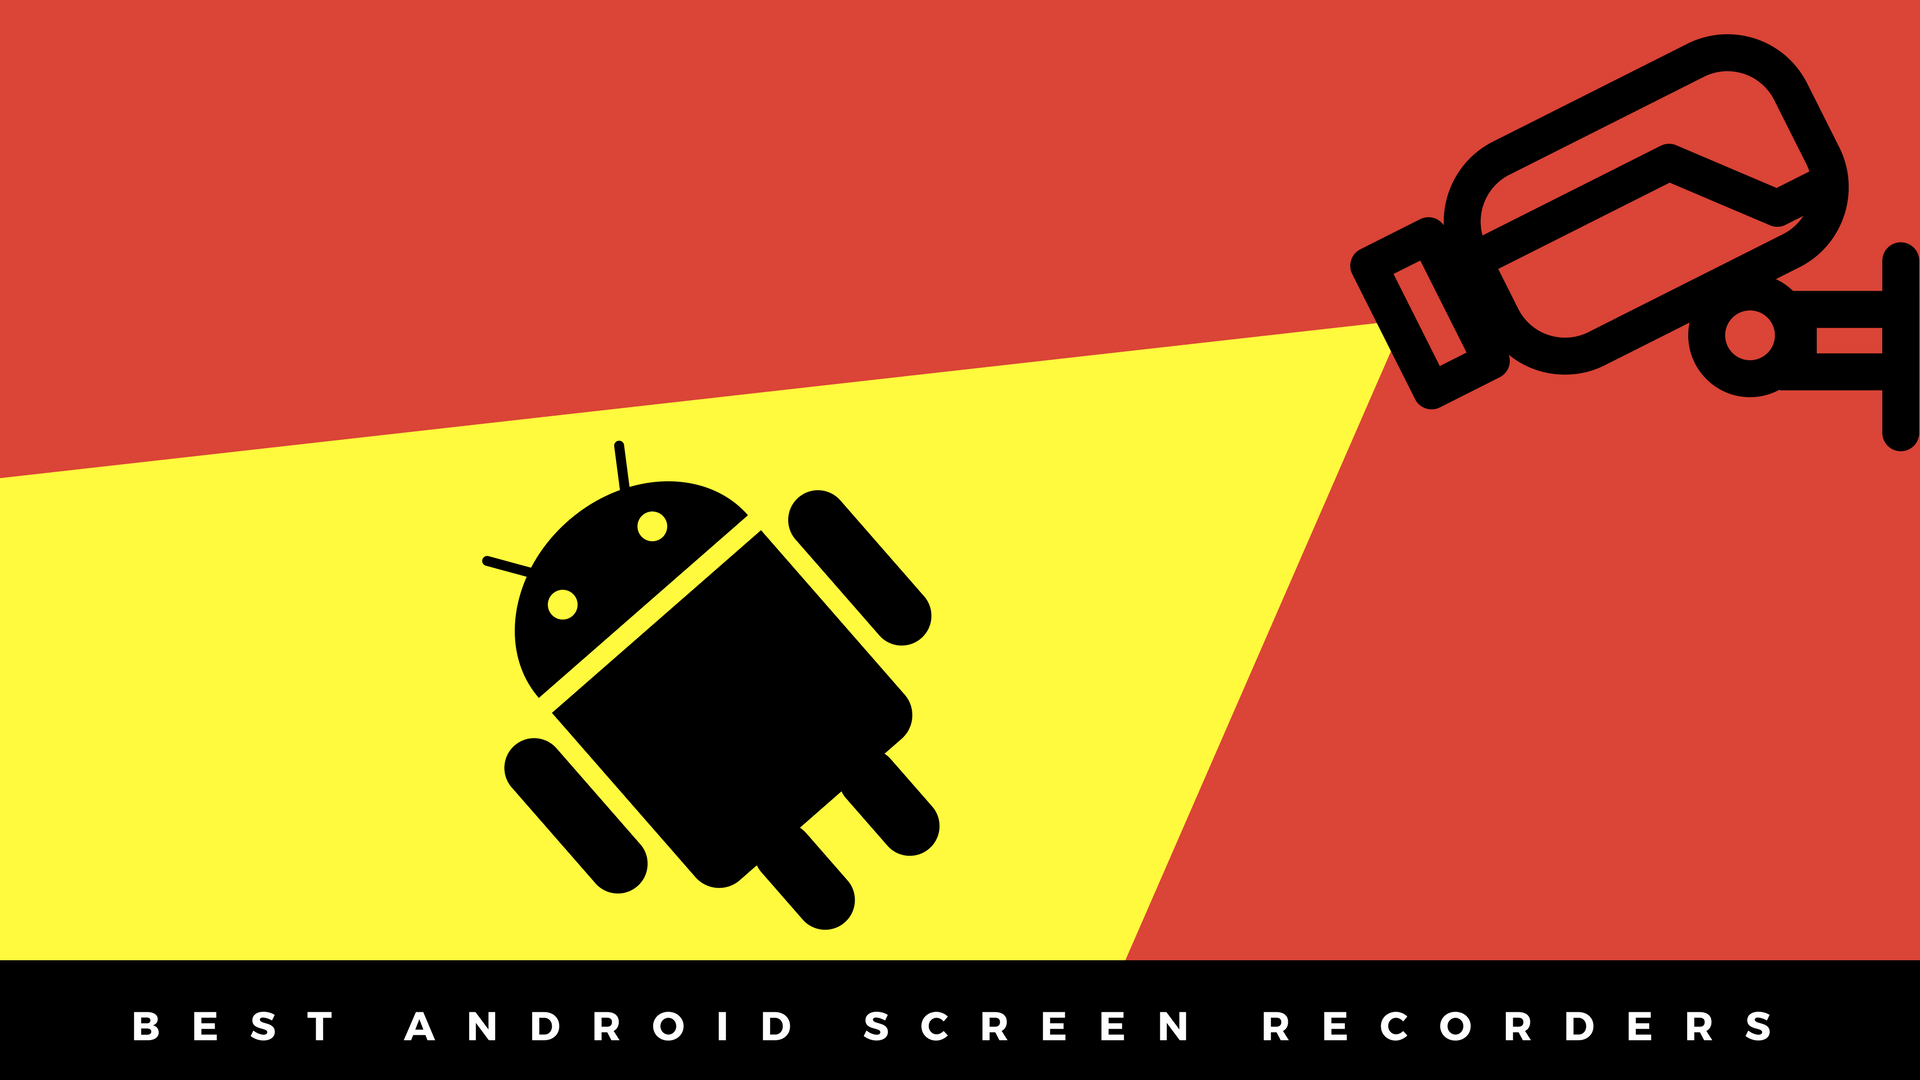 Best Android Screen Recorder 2018